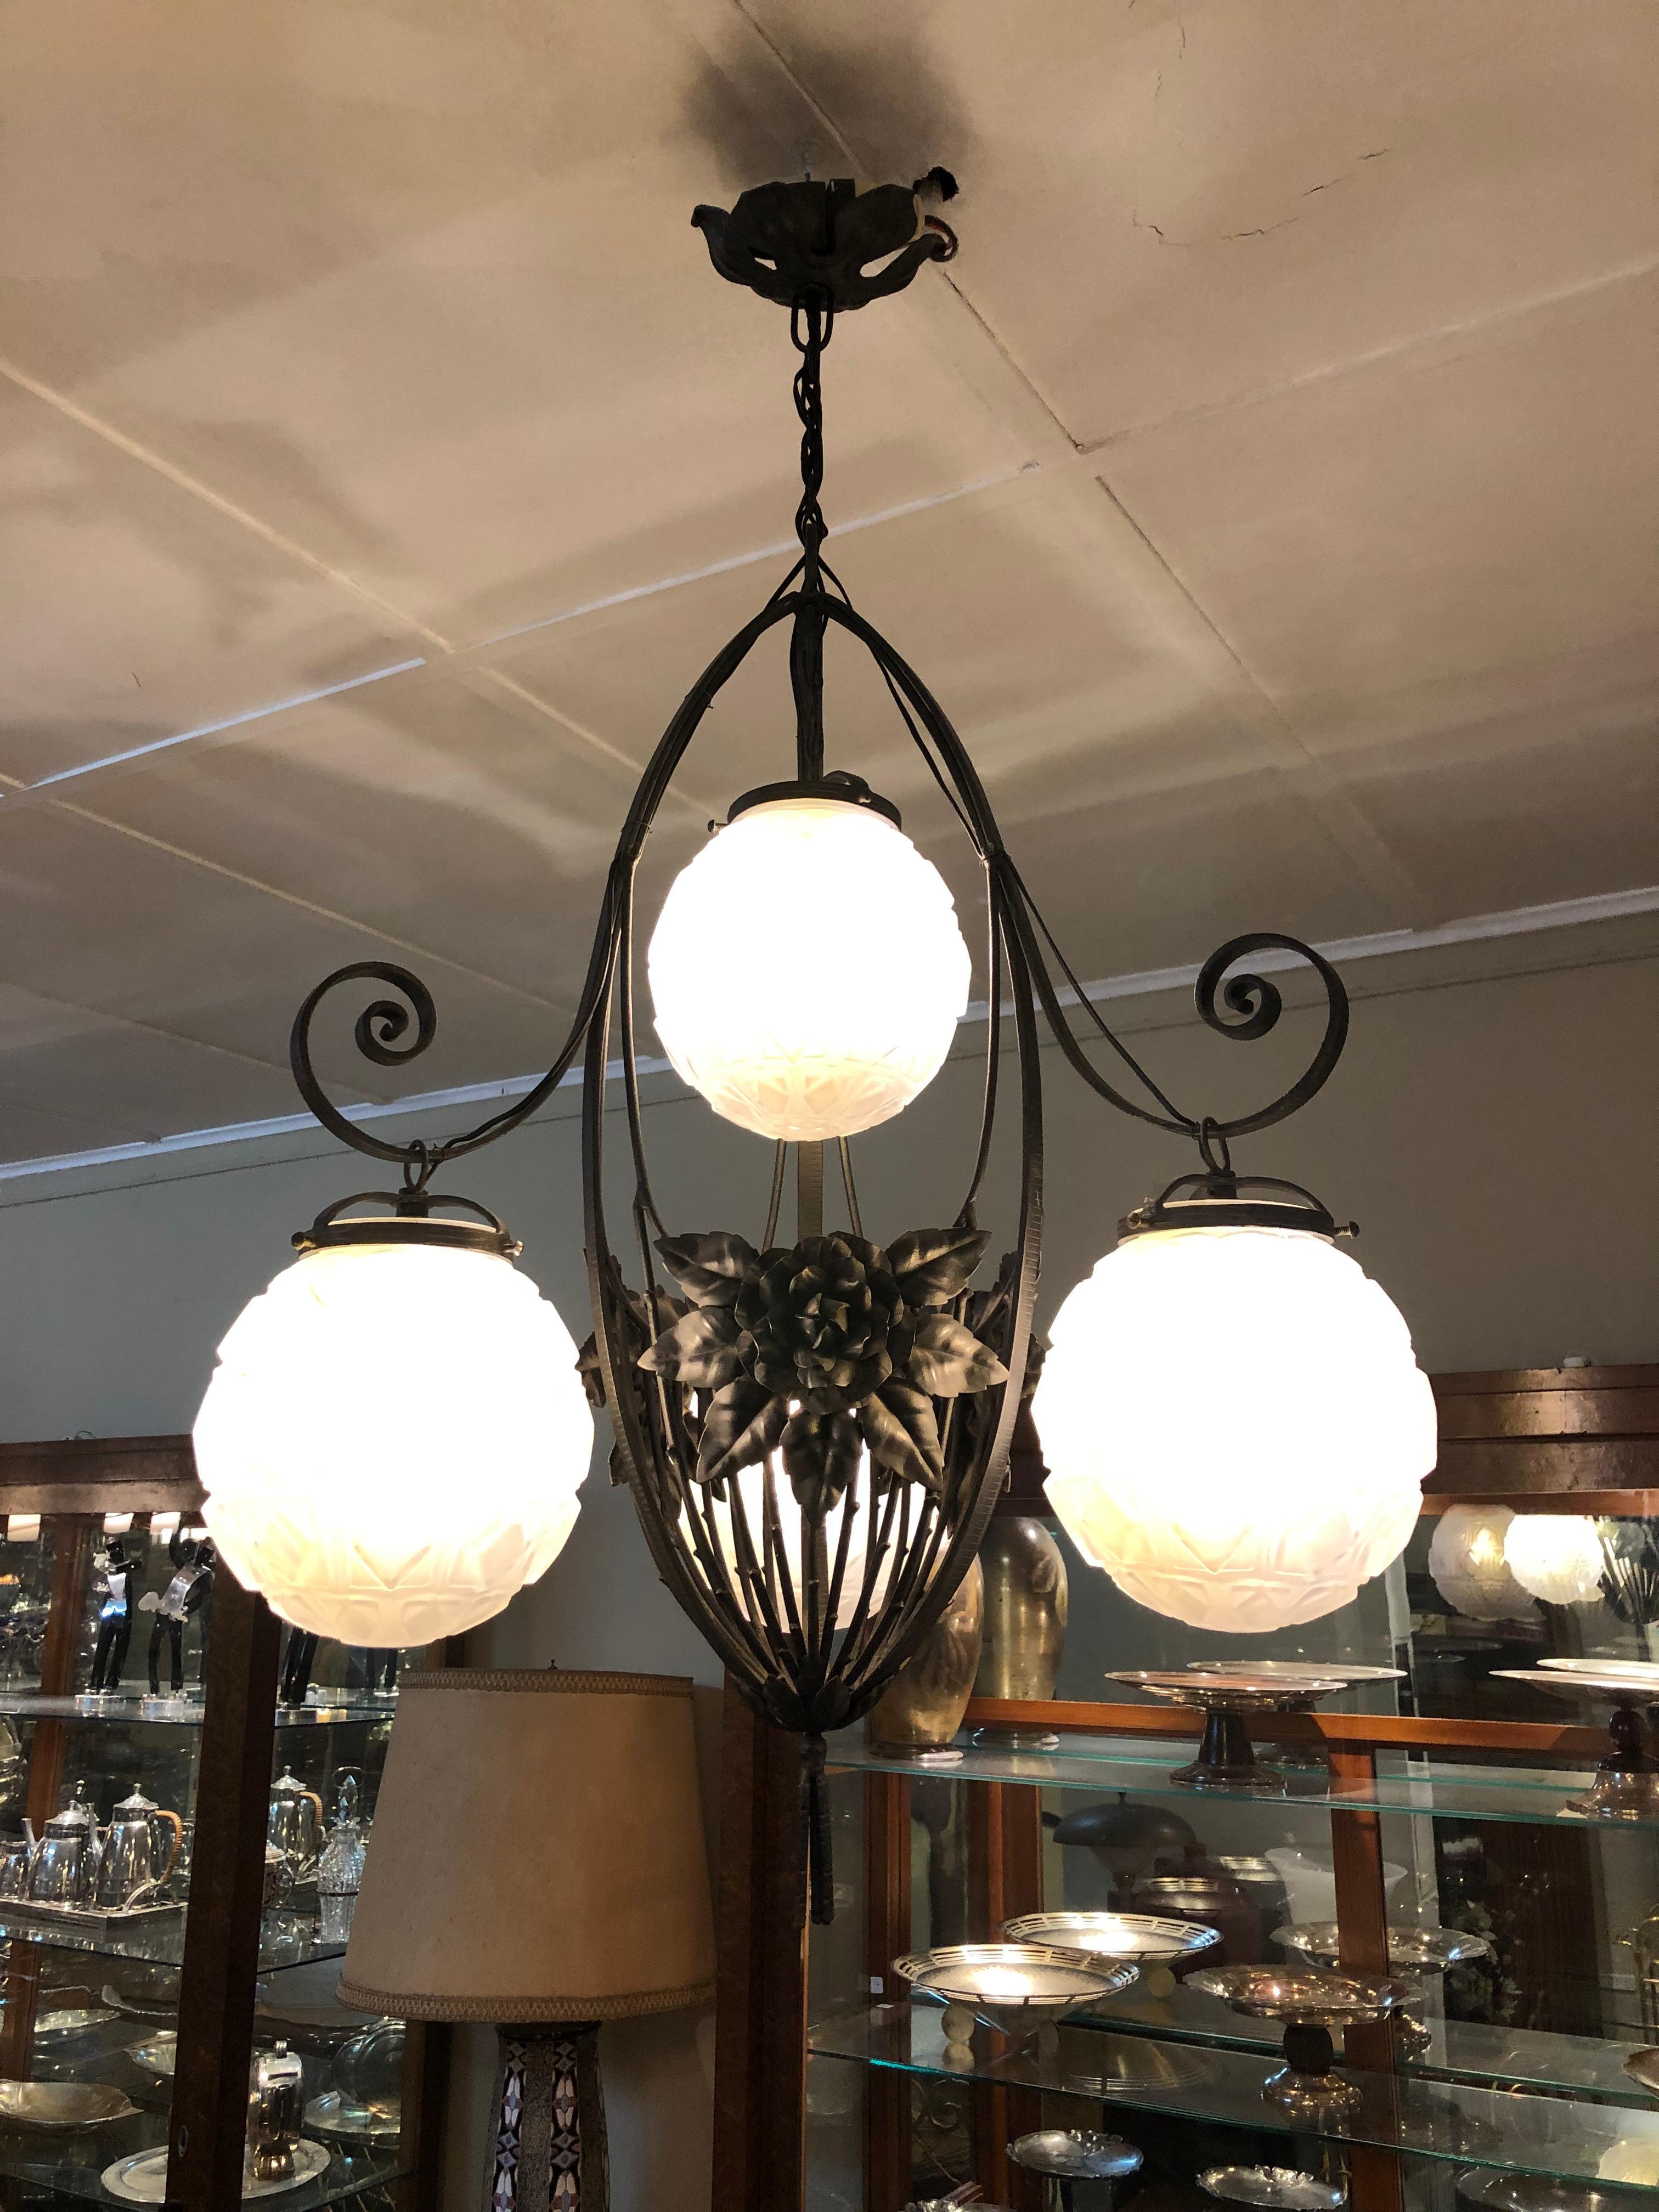 Chandelier Jugendstil, Art Nouveau, Liberty

Year: 1900
Country: French
Glass and Iron
It is an elegant and sophisticated Chandelier
We have specialized in the sale of Art Deco and Art Nouveau styles since 1982.If you have any questions we are at